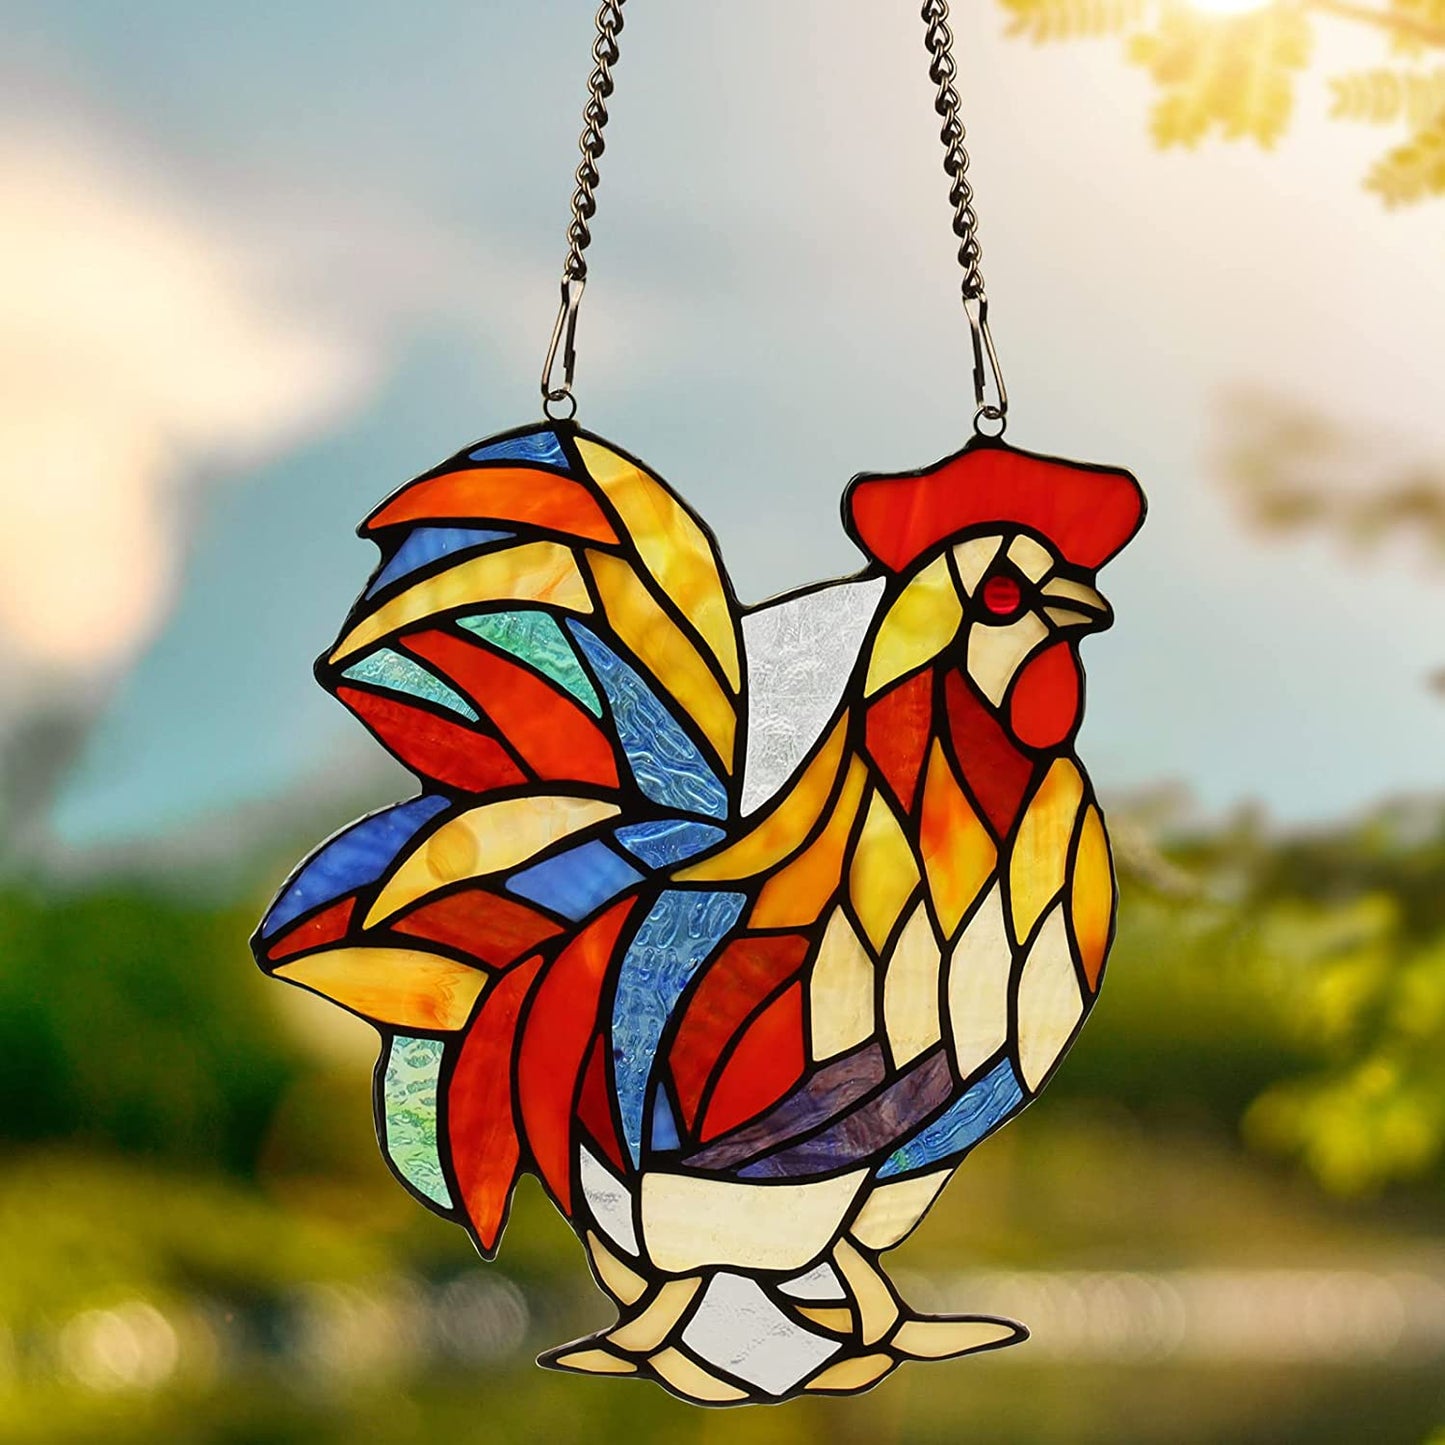 Butterfly&Rooster Stained Glass Window Hanging Suncatcher